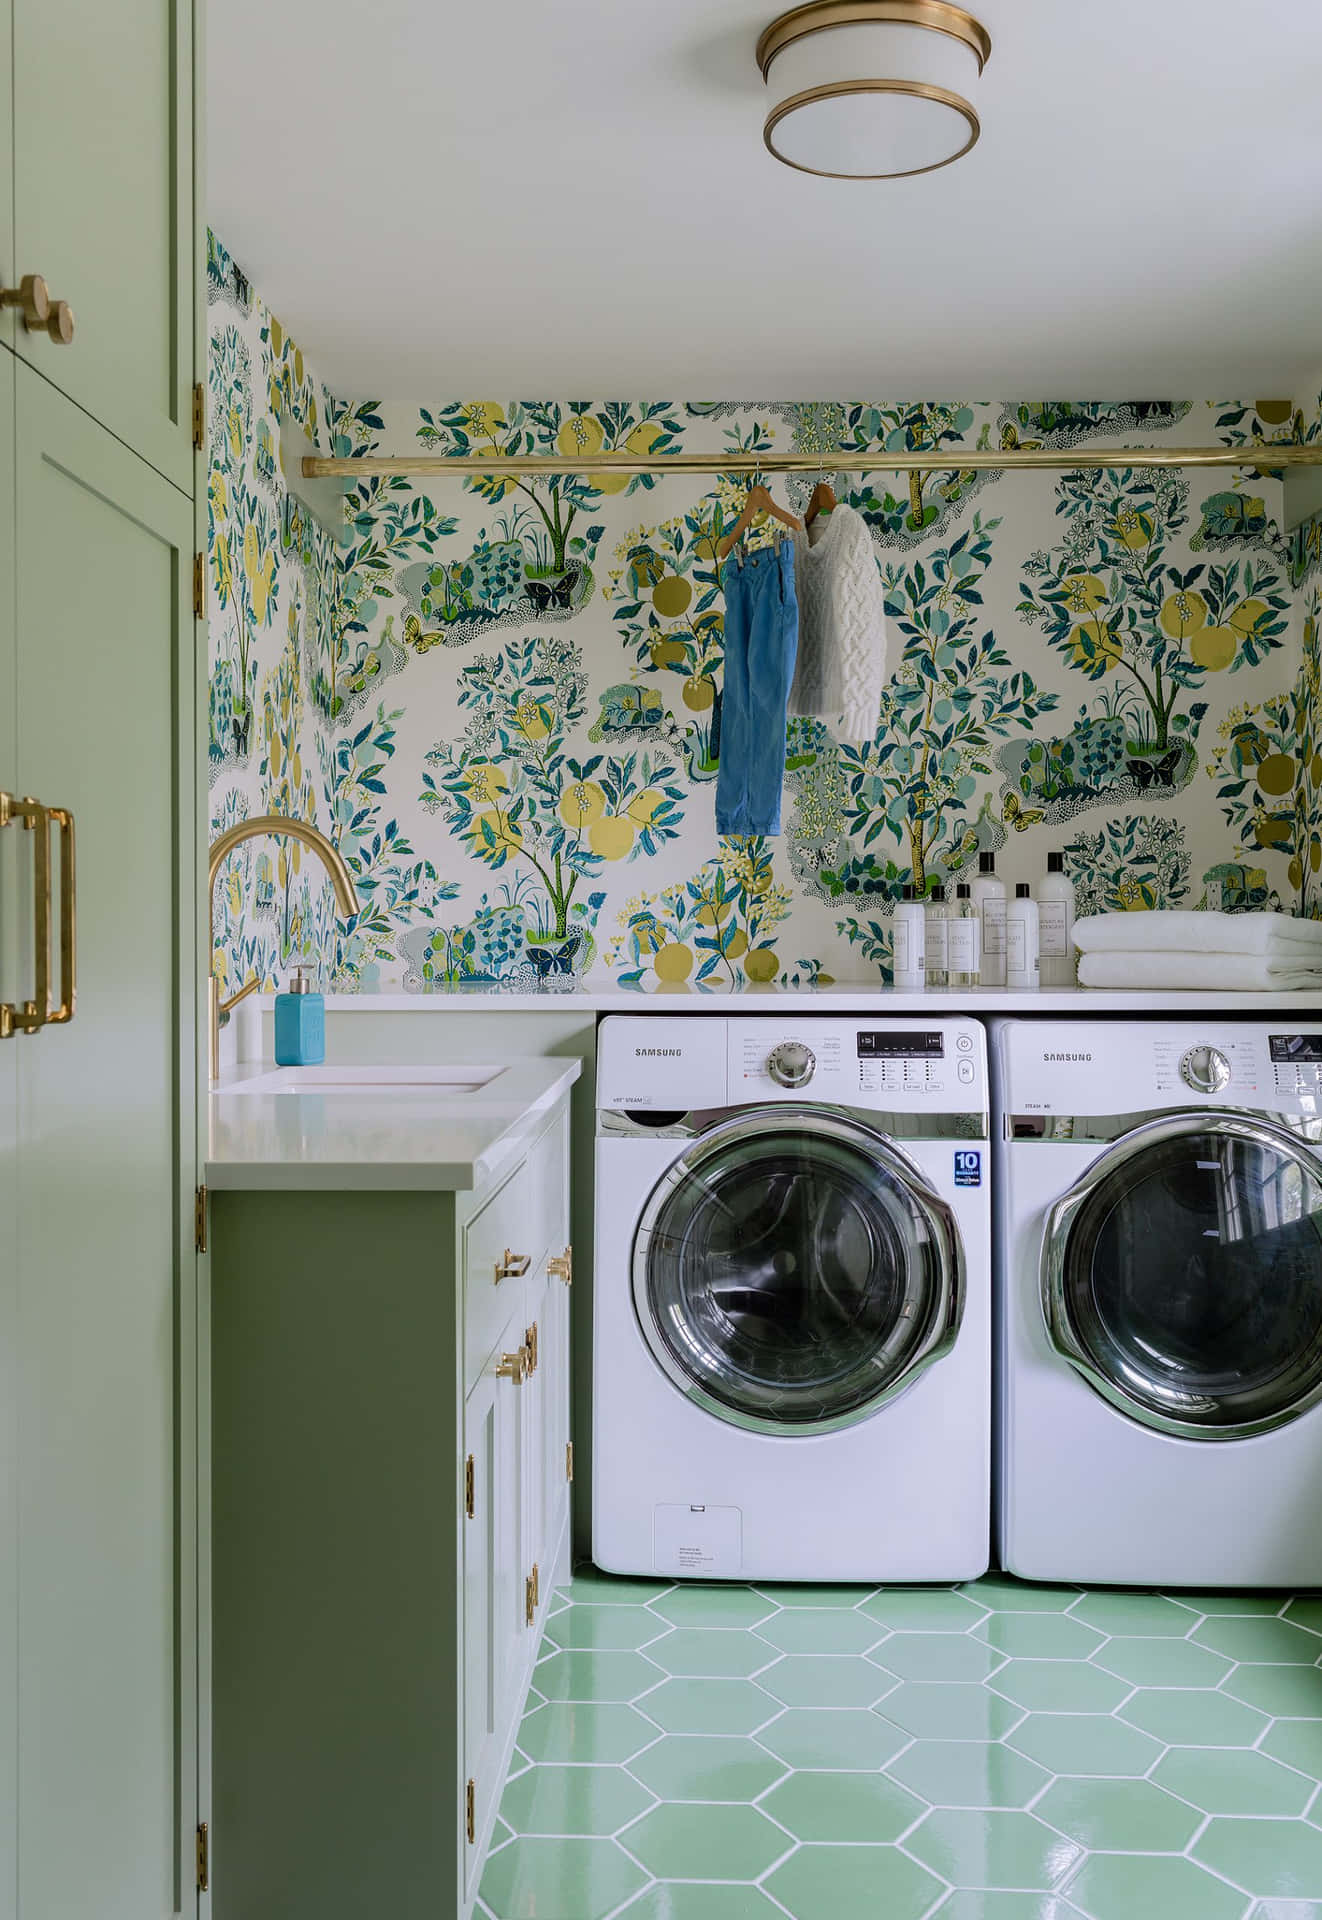 Download Laundry Room Pictures 1762 x 2560 | Wallpapers.com